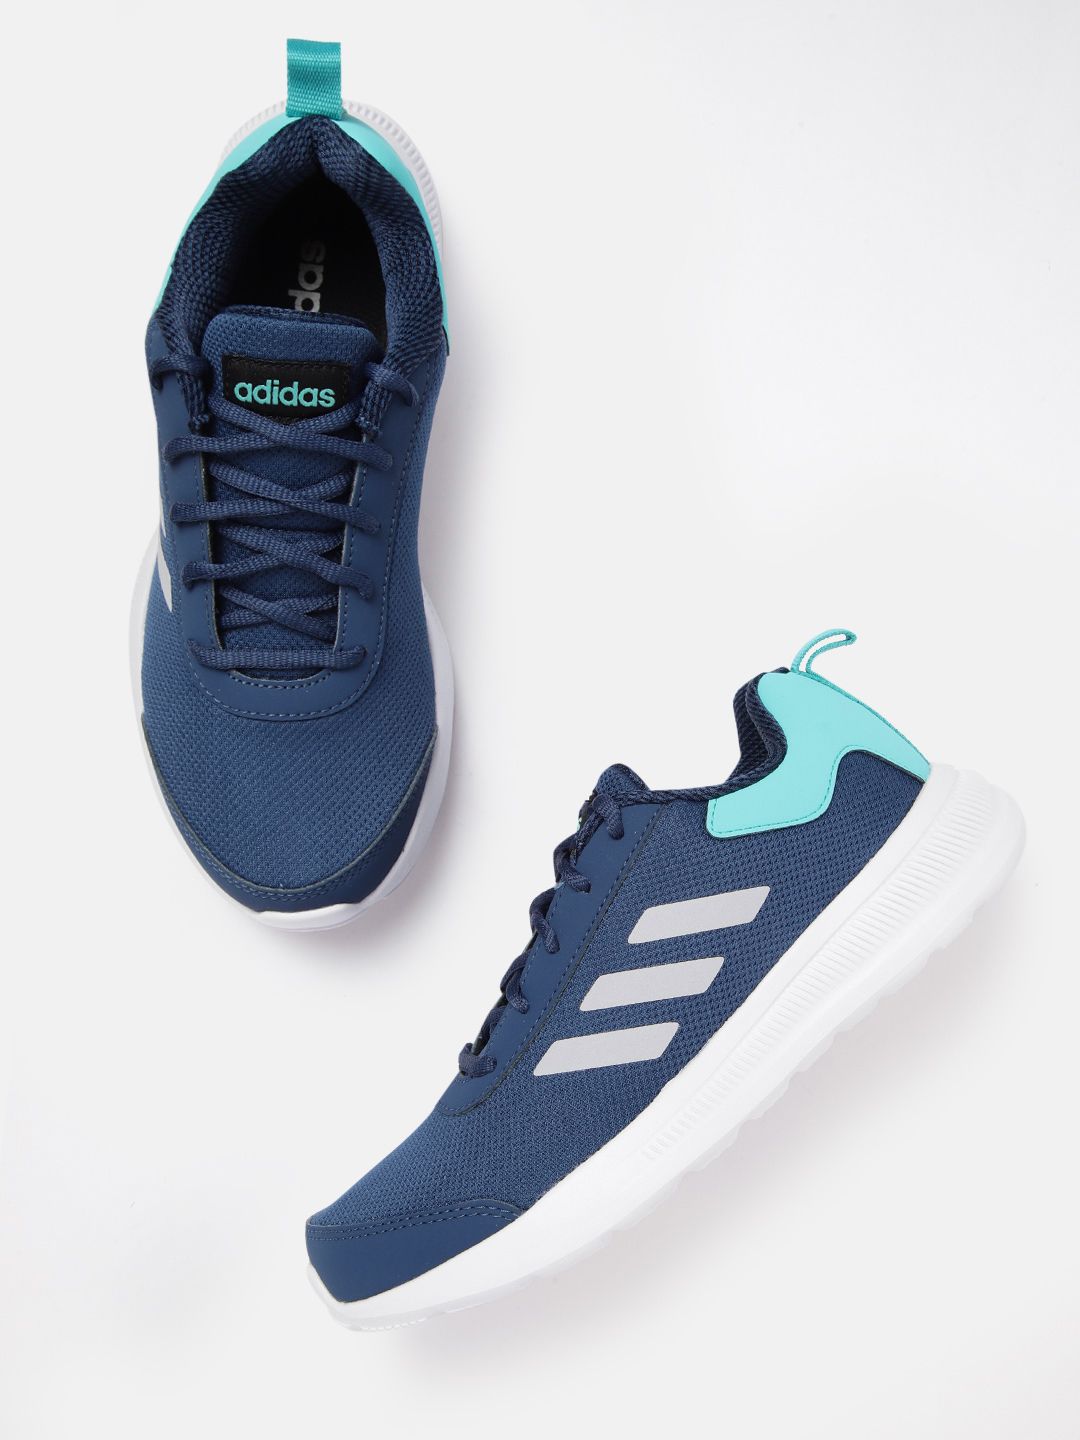 ADIDAS Women Navy Blue GlideEase Running Shoes Price in India